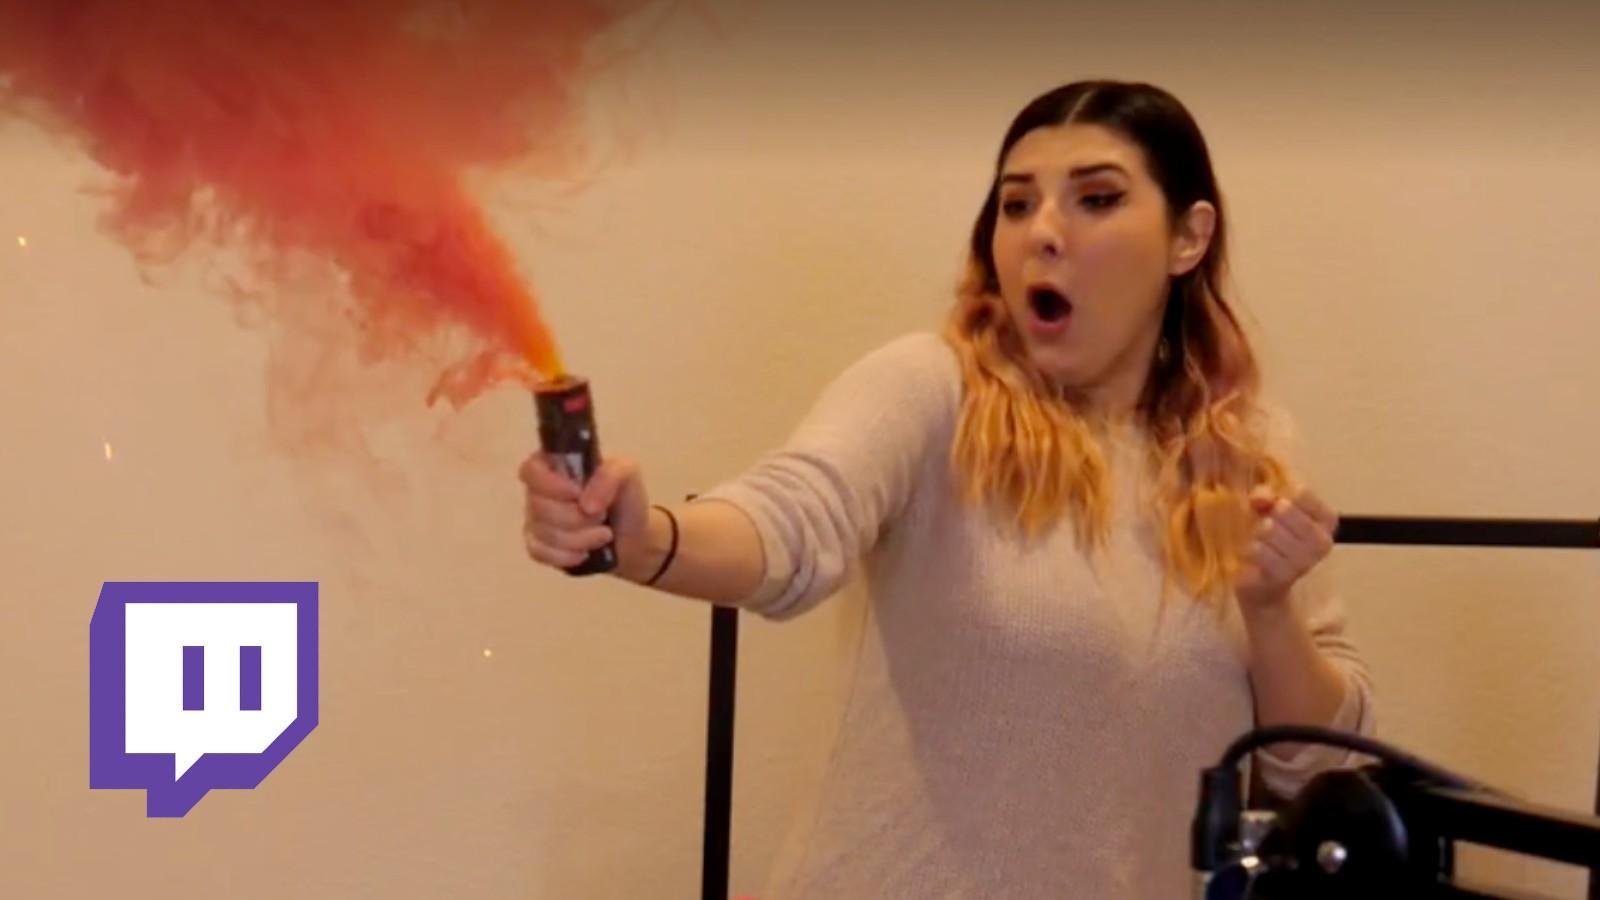 Twitch streamer holds smoke grenade with shocked face